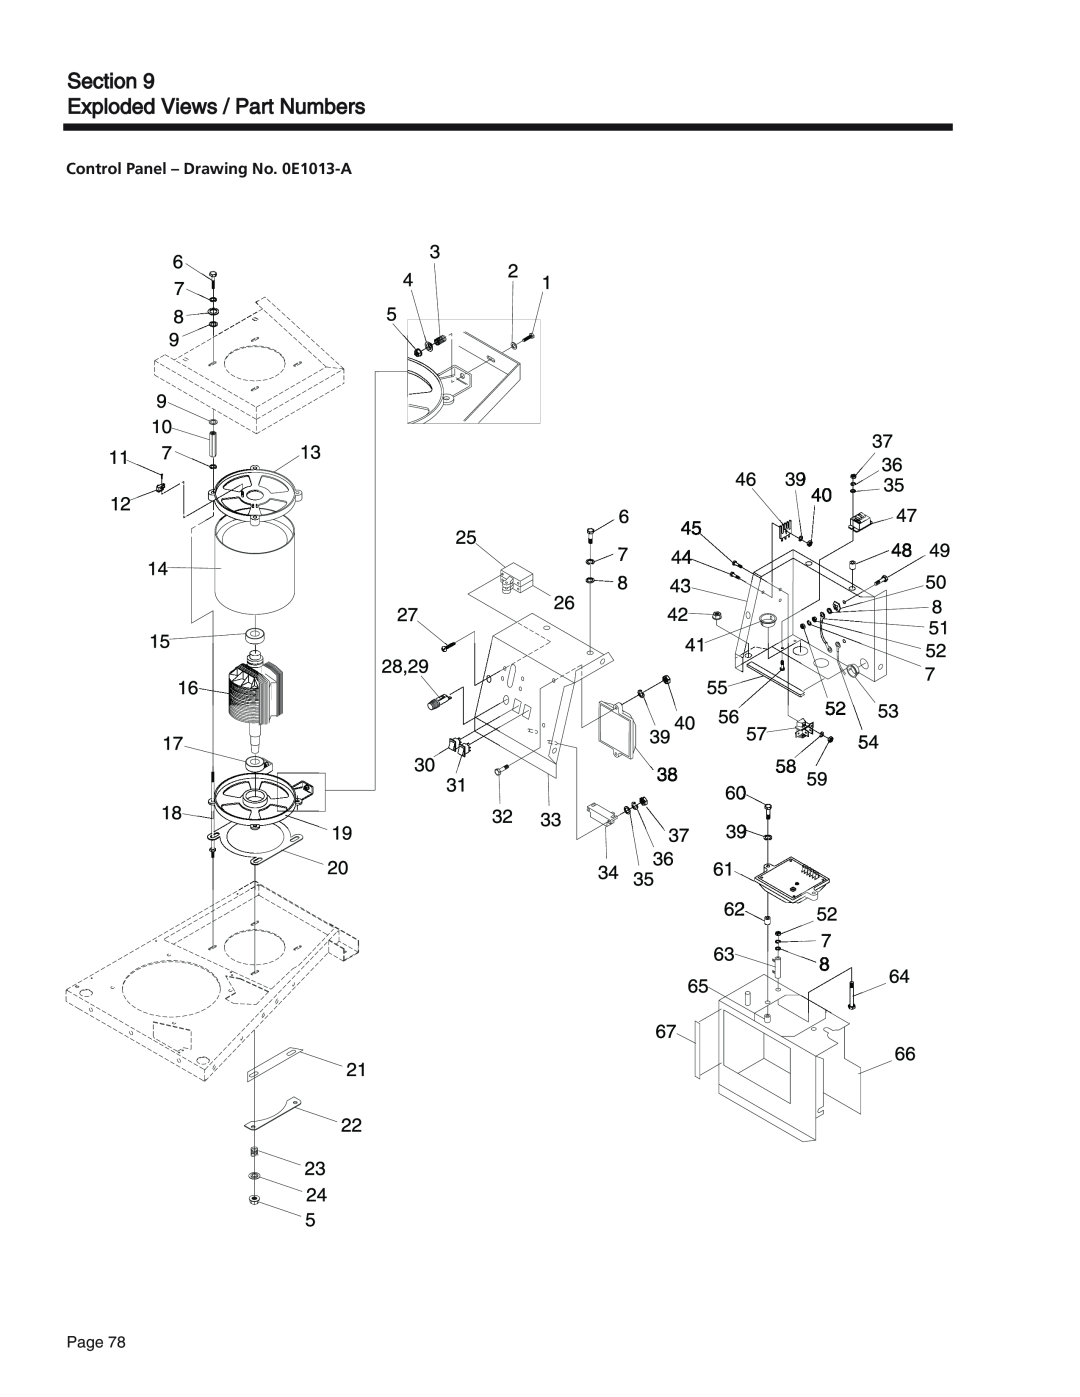 Generac Power Systems 65, 55, 75 manual Section Exploded Views / Part Numbers, Control Panel - Drawing No. 0E1013-A 